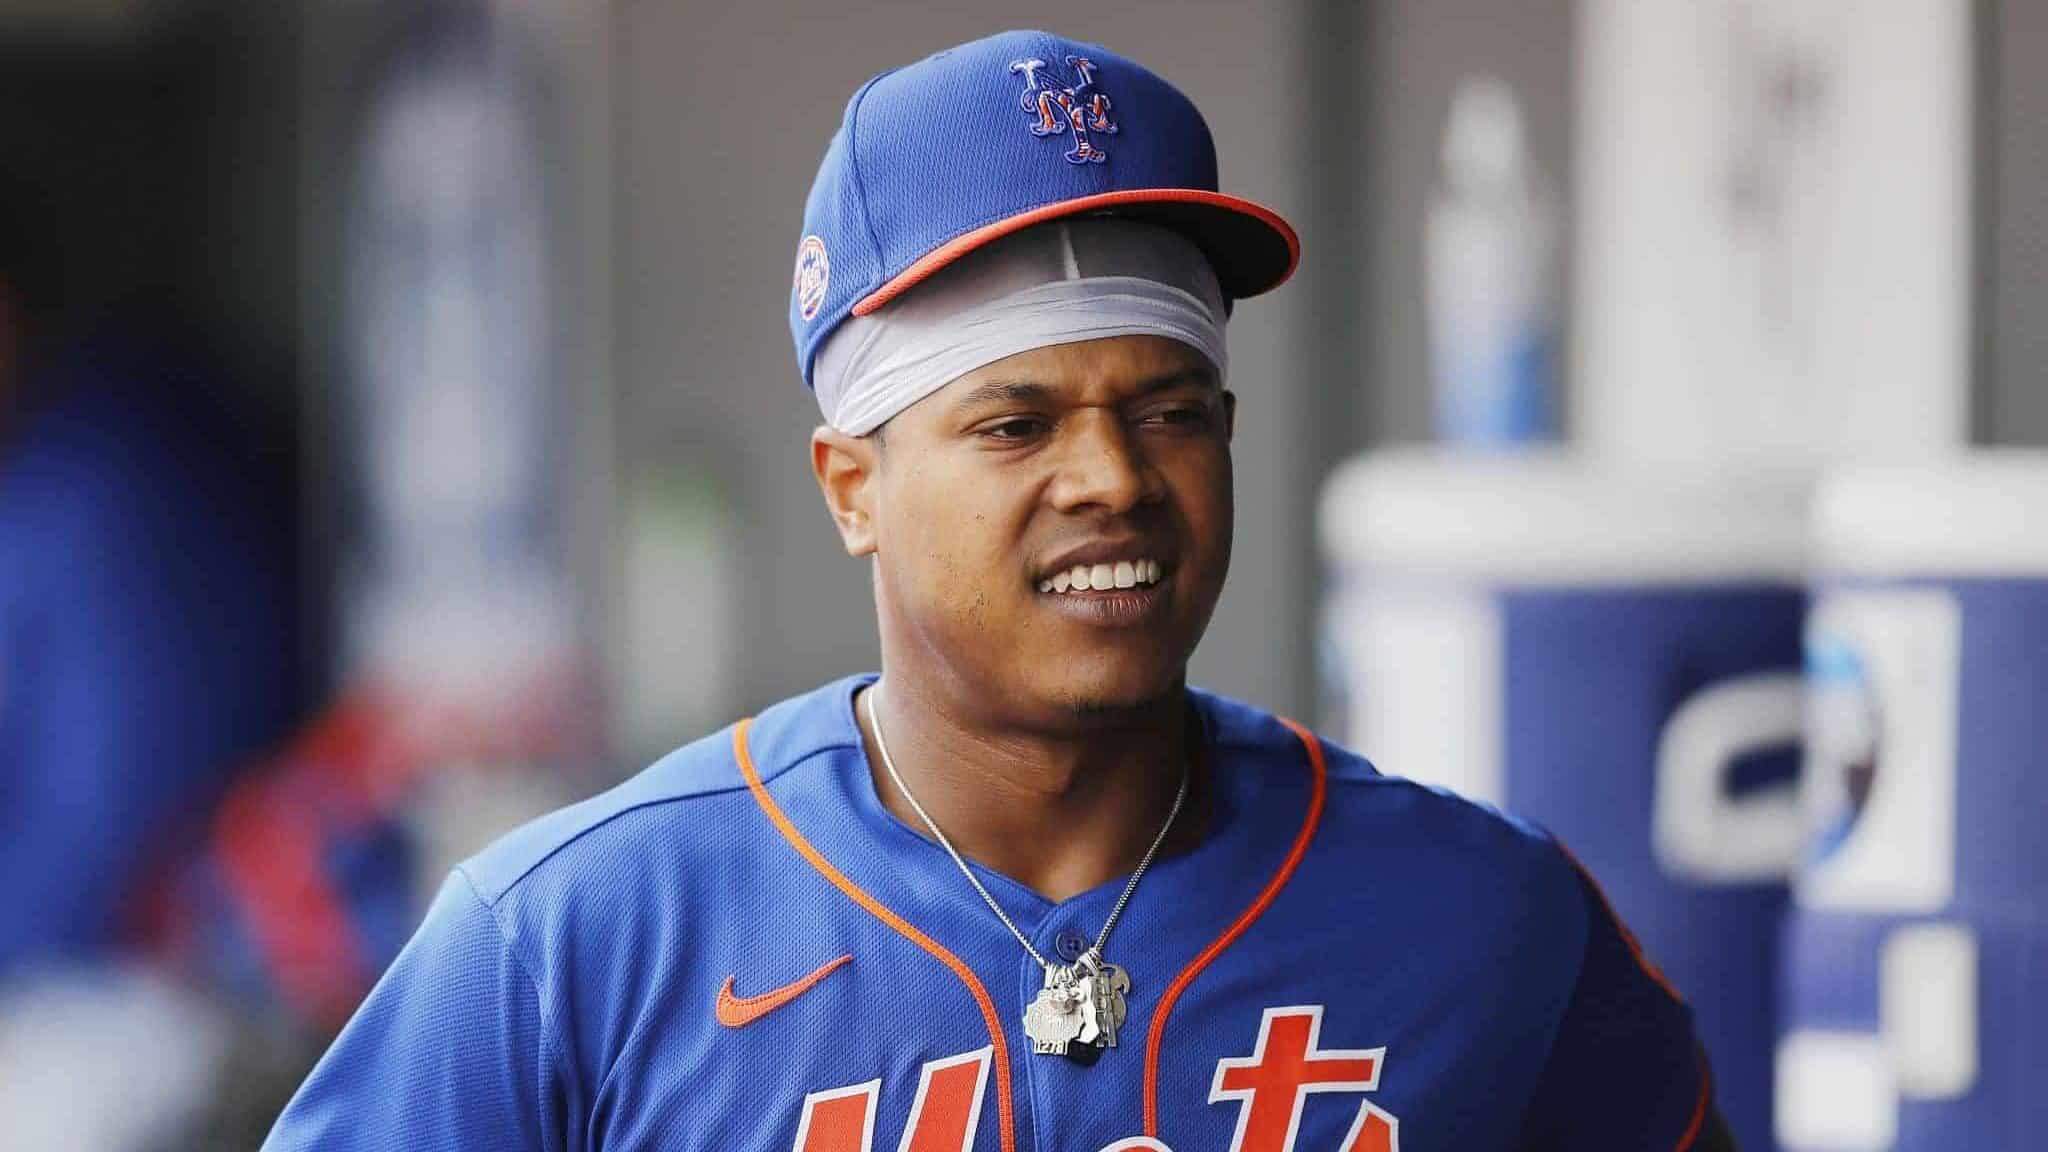 JUPITER, FLORIDA - FEBRUARY 22: Marcus Stroman #0 of the New York Mets reacts against the St. Louis Cardinals during a Grapefruit League spring training game at Roger Dean Stadium on February 22, 2020 in Jupiter, Florida.